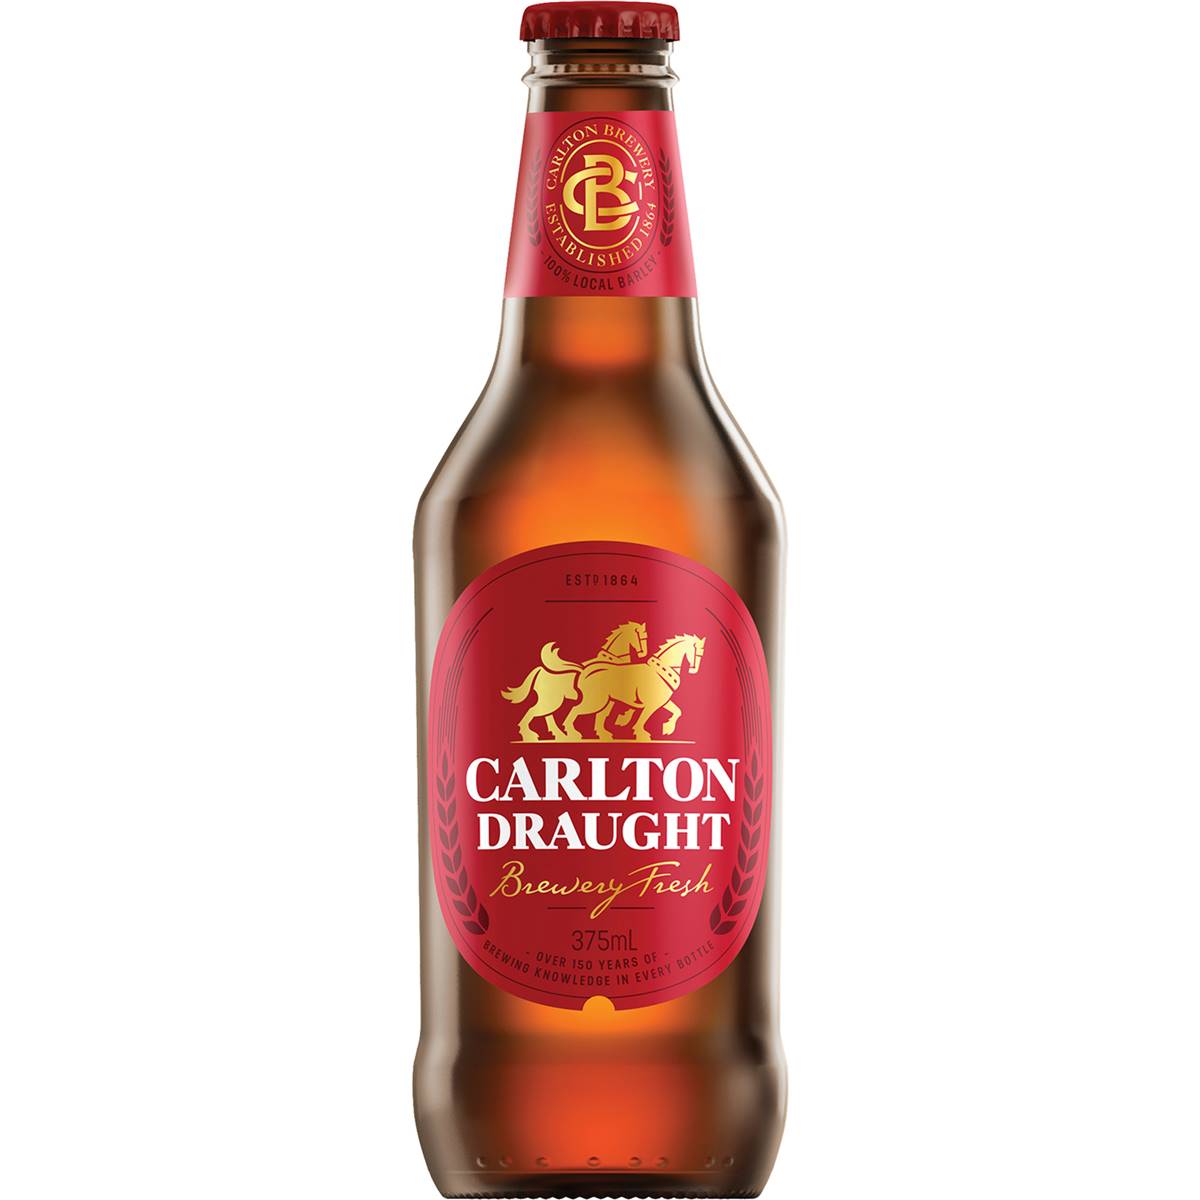 Calories in Carlton Draught Lager Stubby